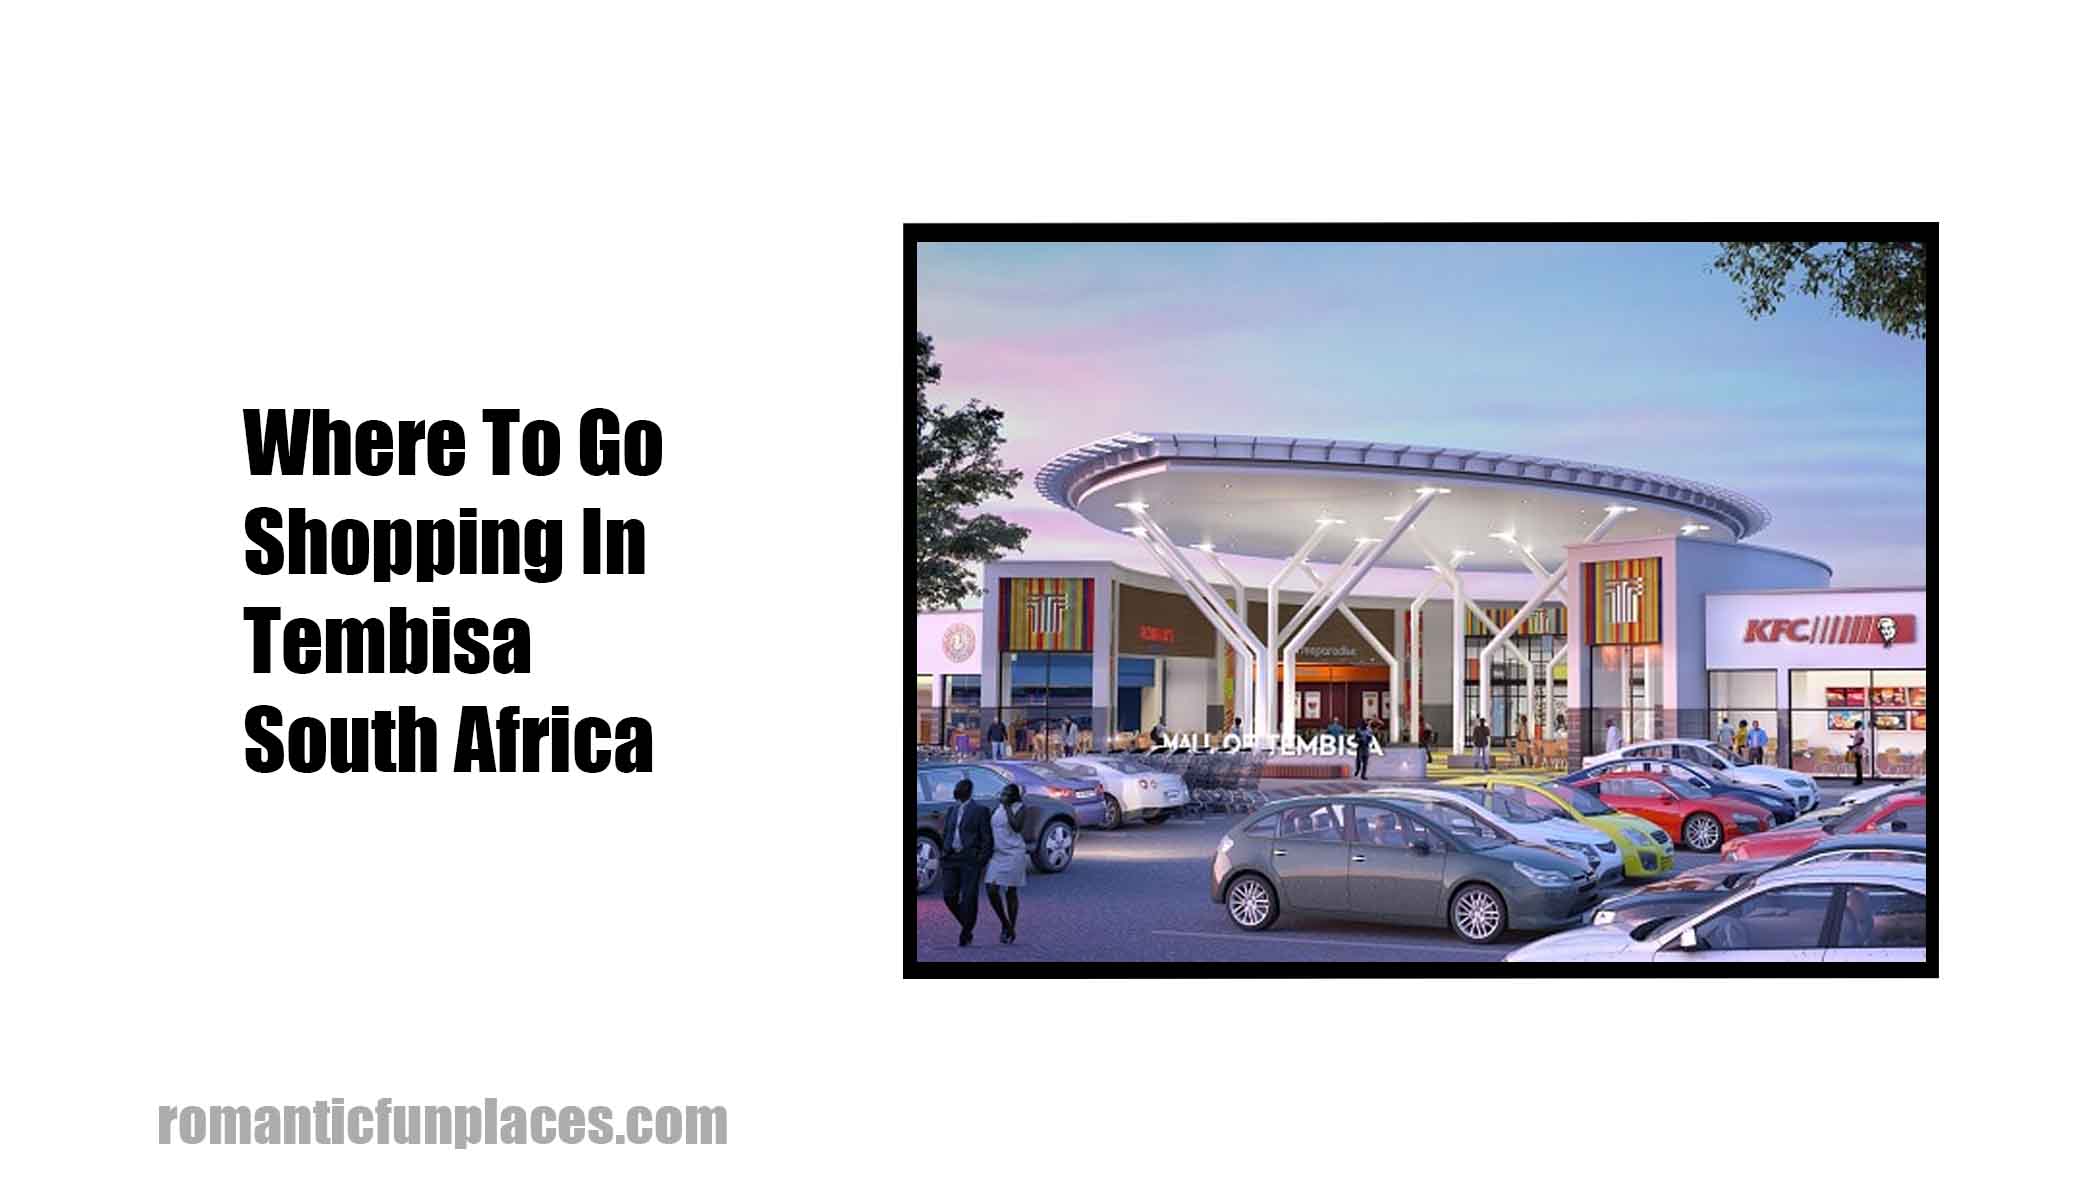 Where To Go Shopping In Tembisa South Africa